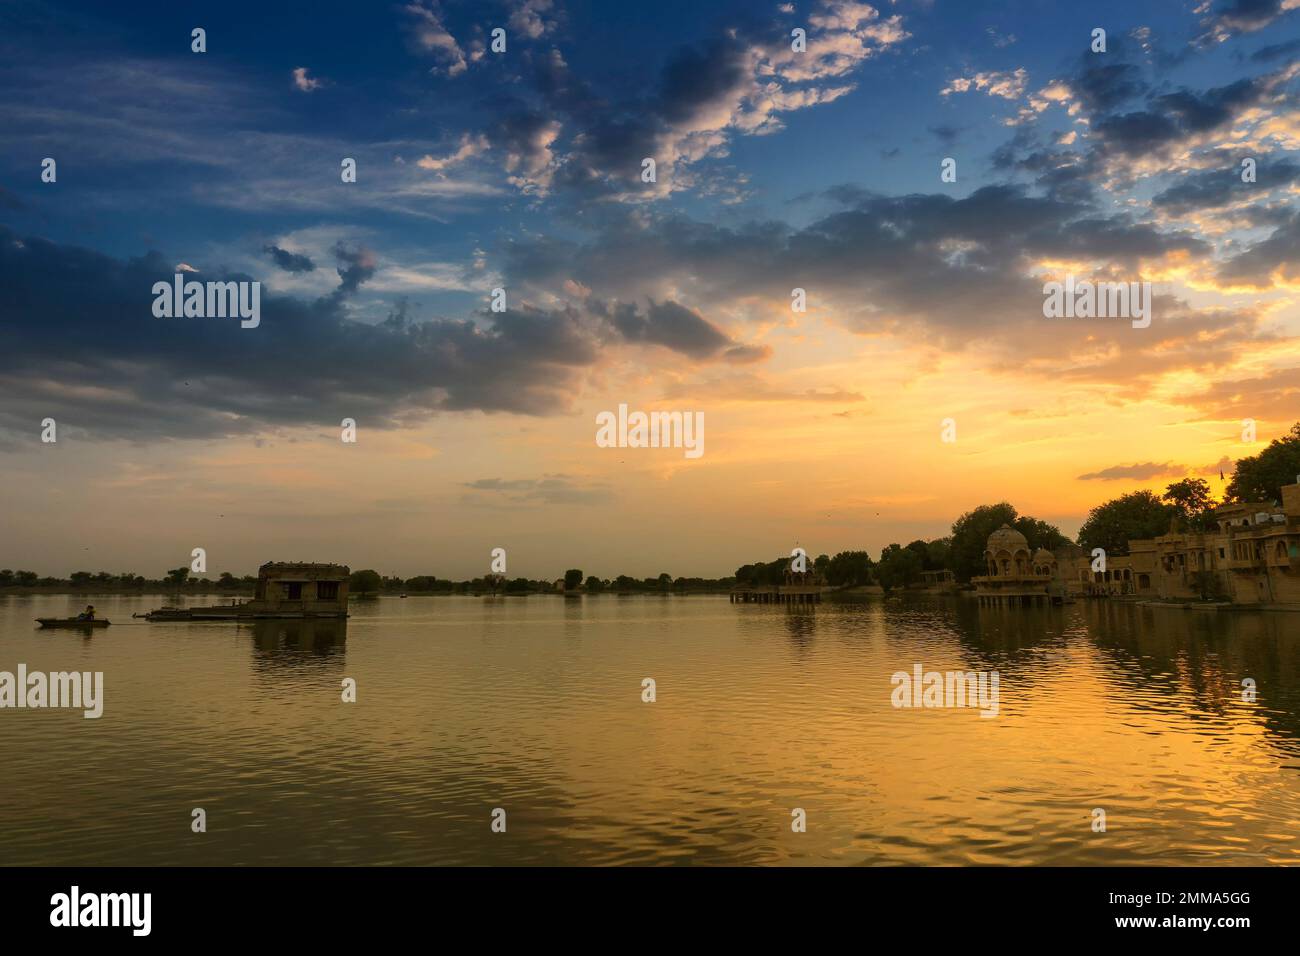 Spectacular sunset at Gadisar lake,Jaisalmer,Rajasthan, India. Setting sun and colorful clouds in the sky with view of the Gadisar lake. Tourist spot. Stock Photo